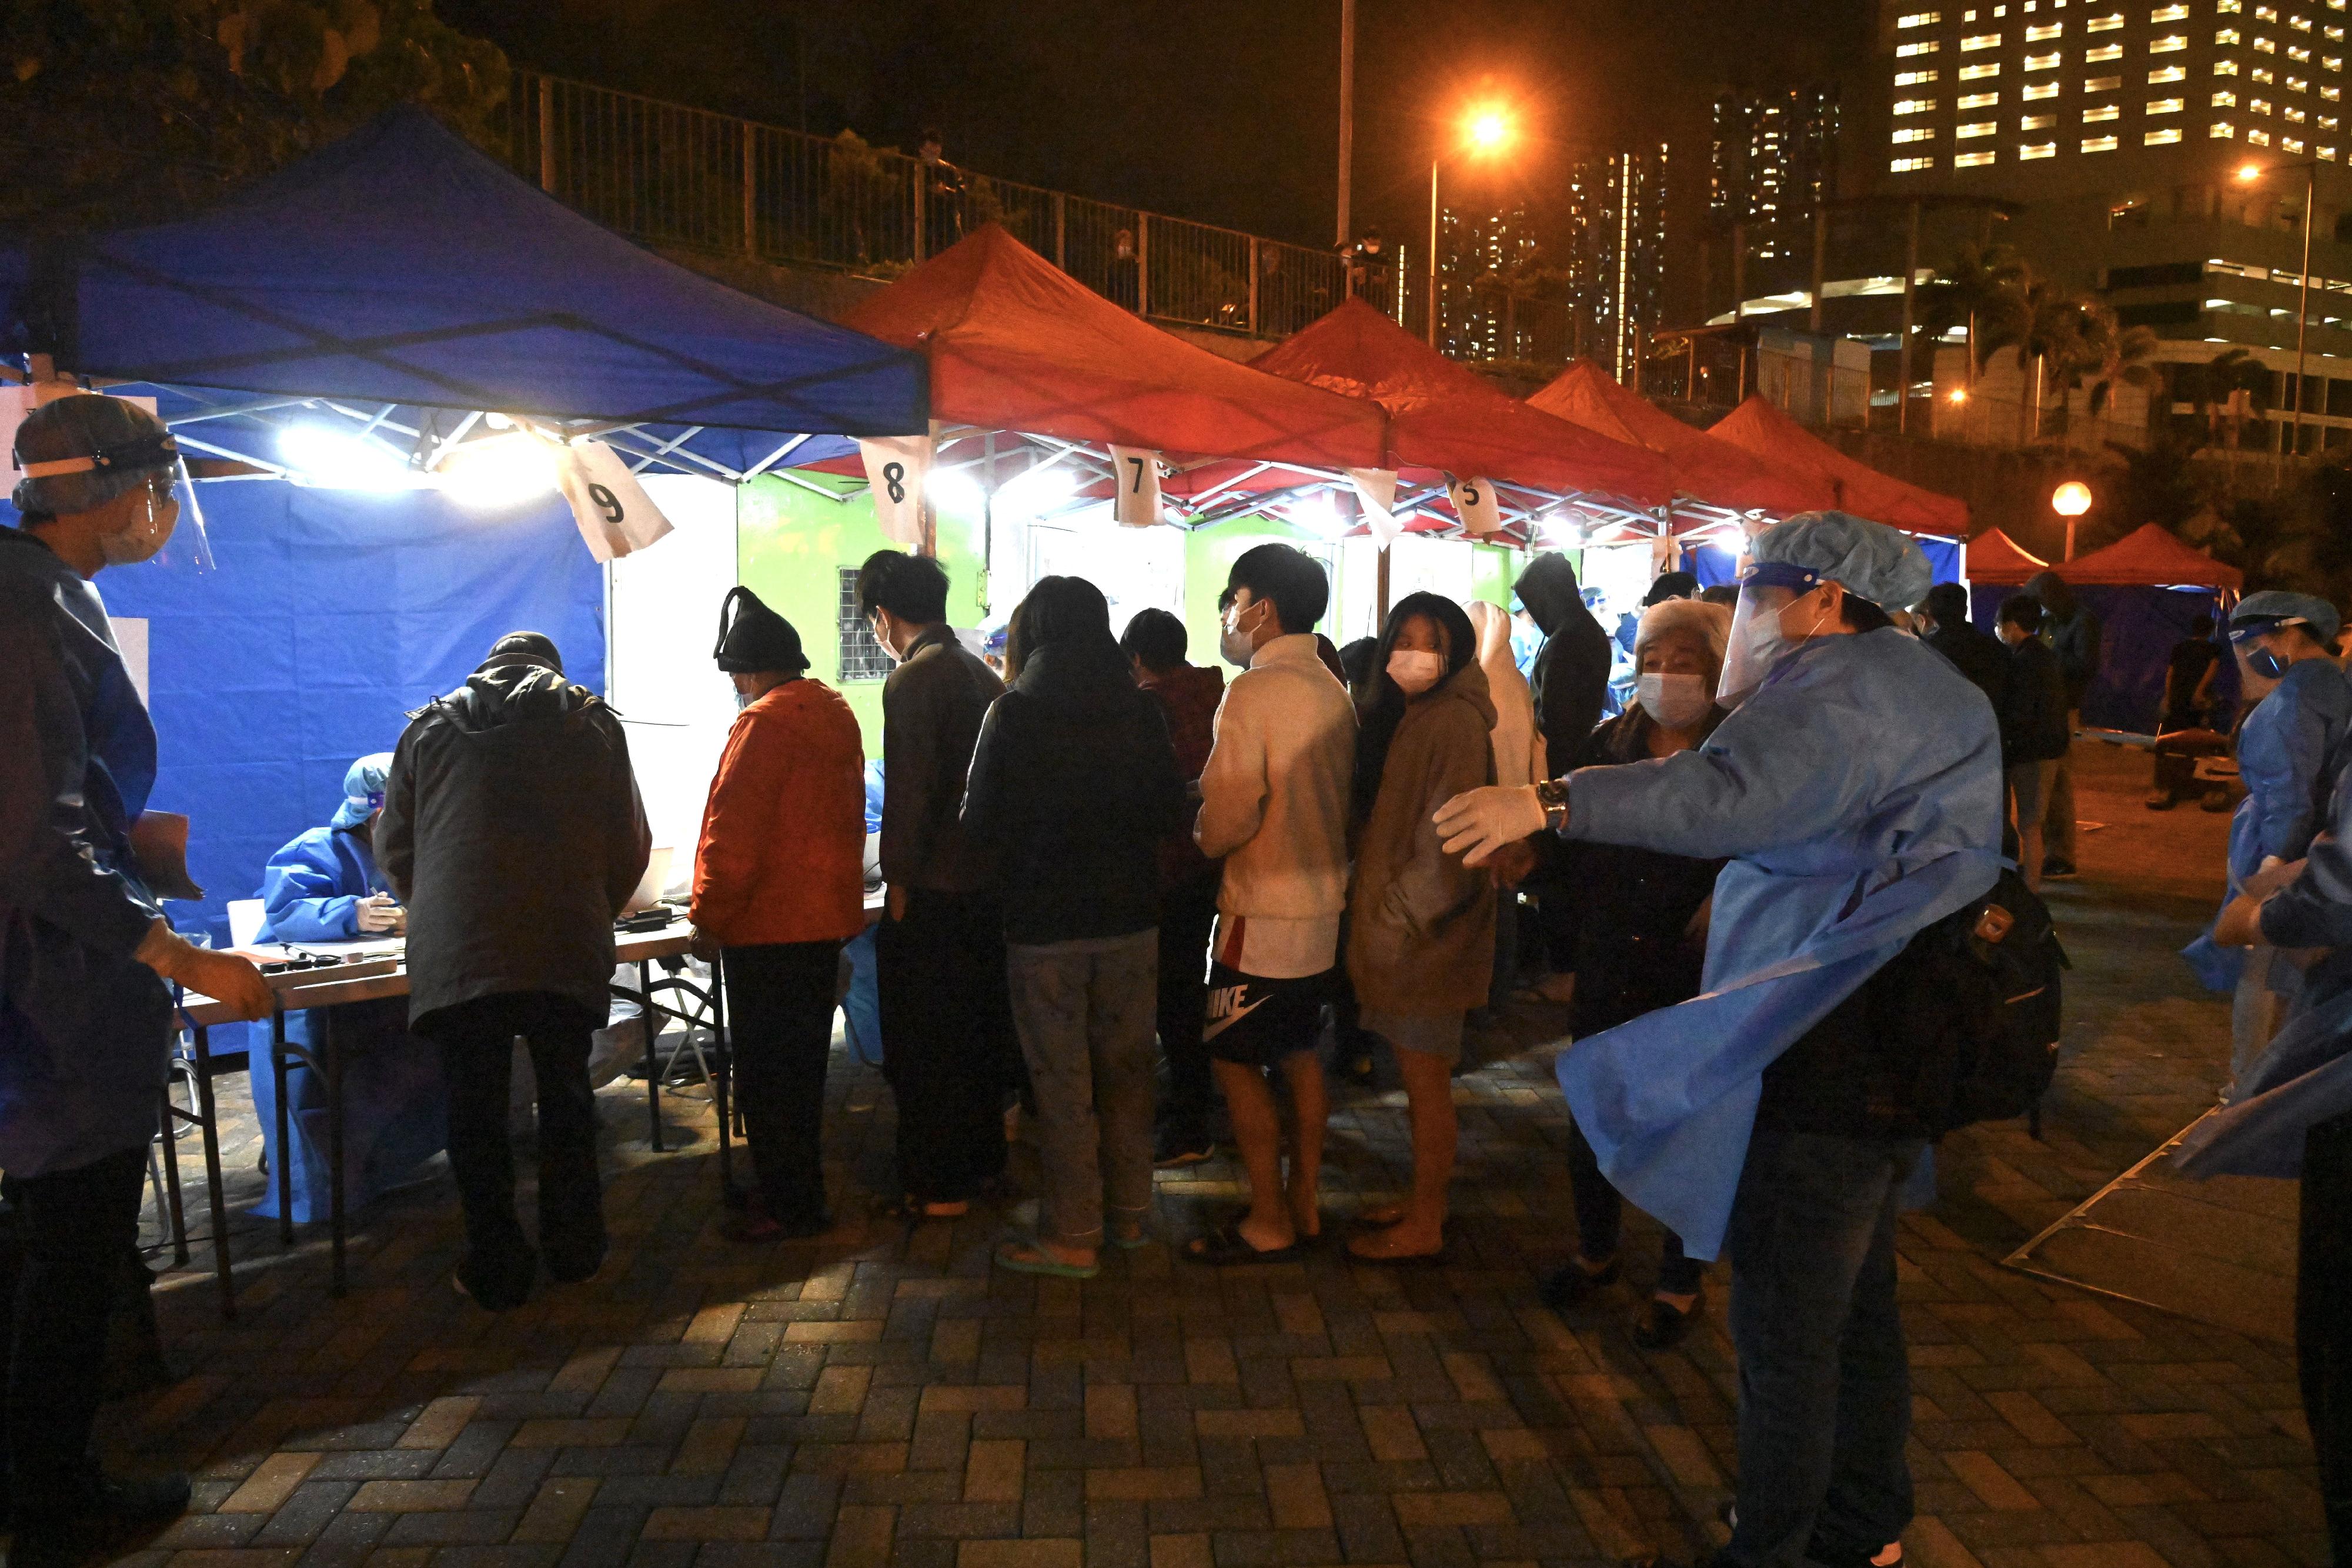 The Census and Statistics Department (C&SD) co-ordinated and conducted a "restriction-testing declaration" and compulsory testing notice operation in respect of a specified "restricted area" in Sau Yin House, Sau Mau Ping Estate, Kwun Tong, last night (February 28). Photo shows C&SD staff members maintaining order during the operation.